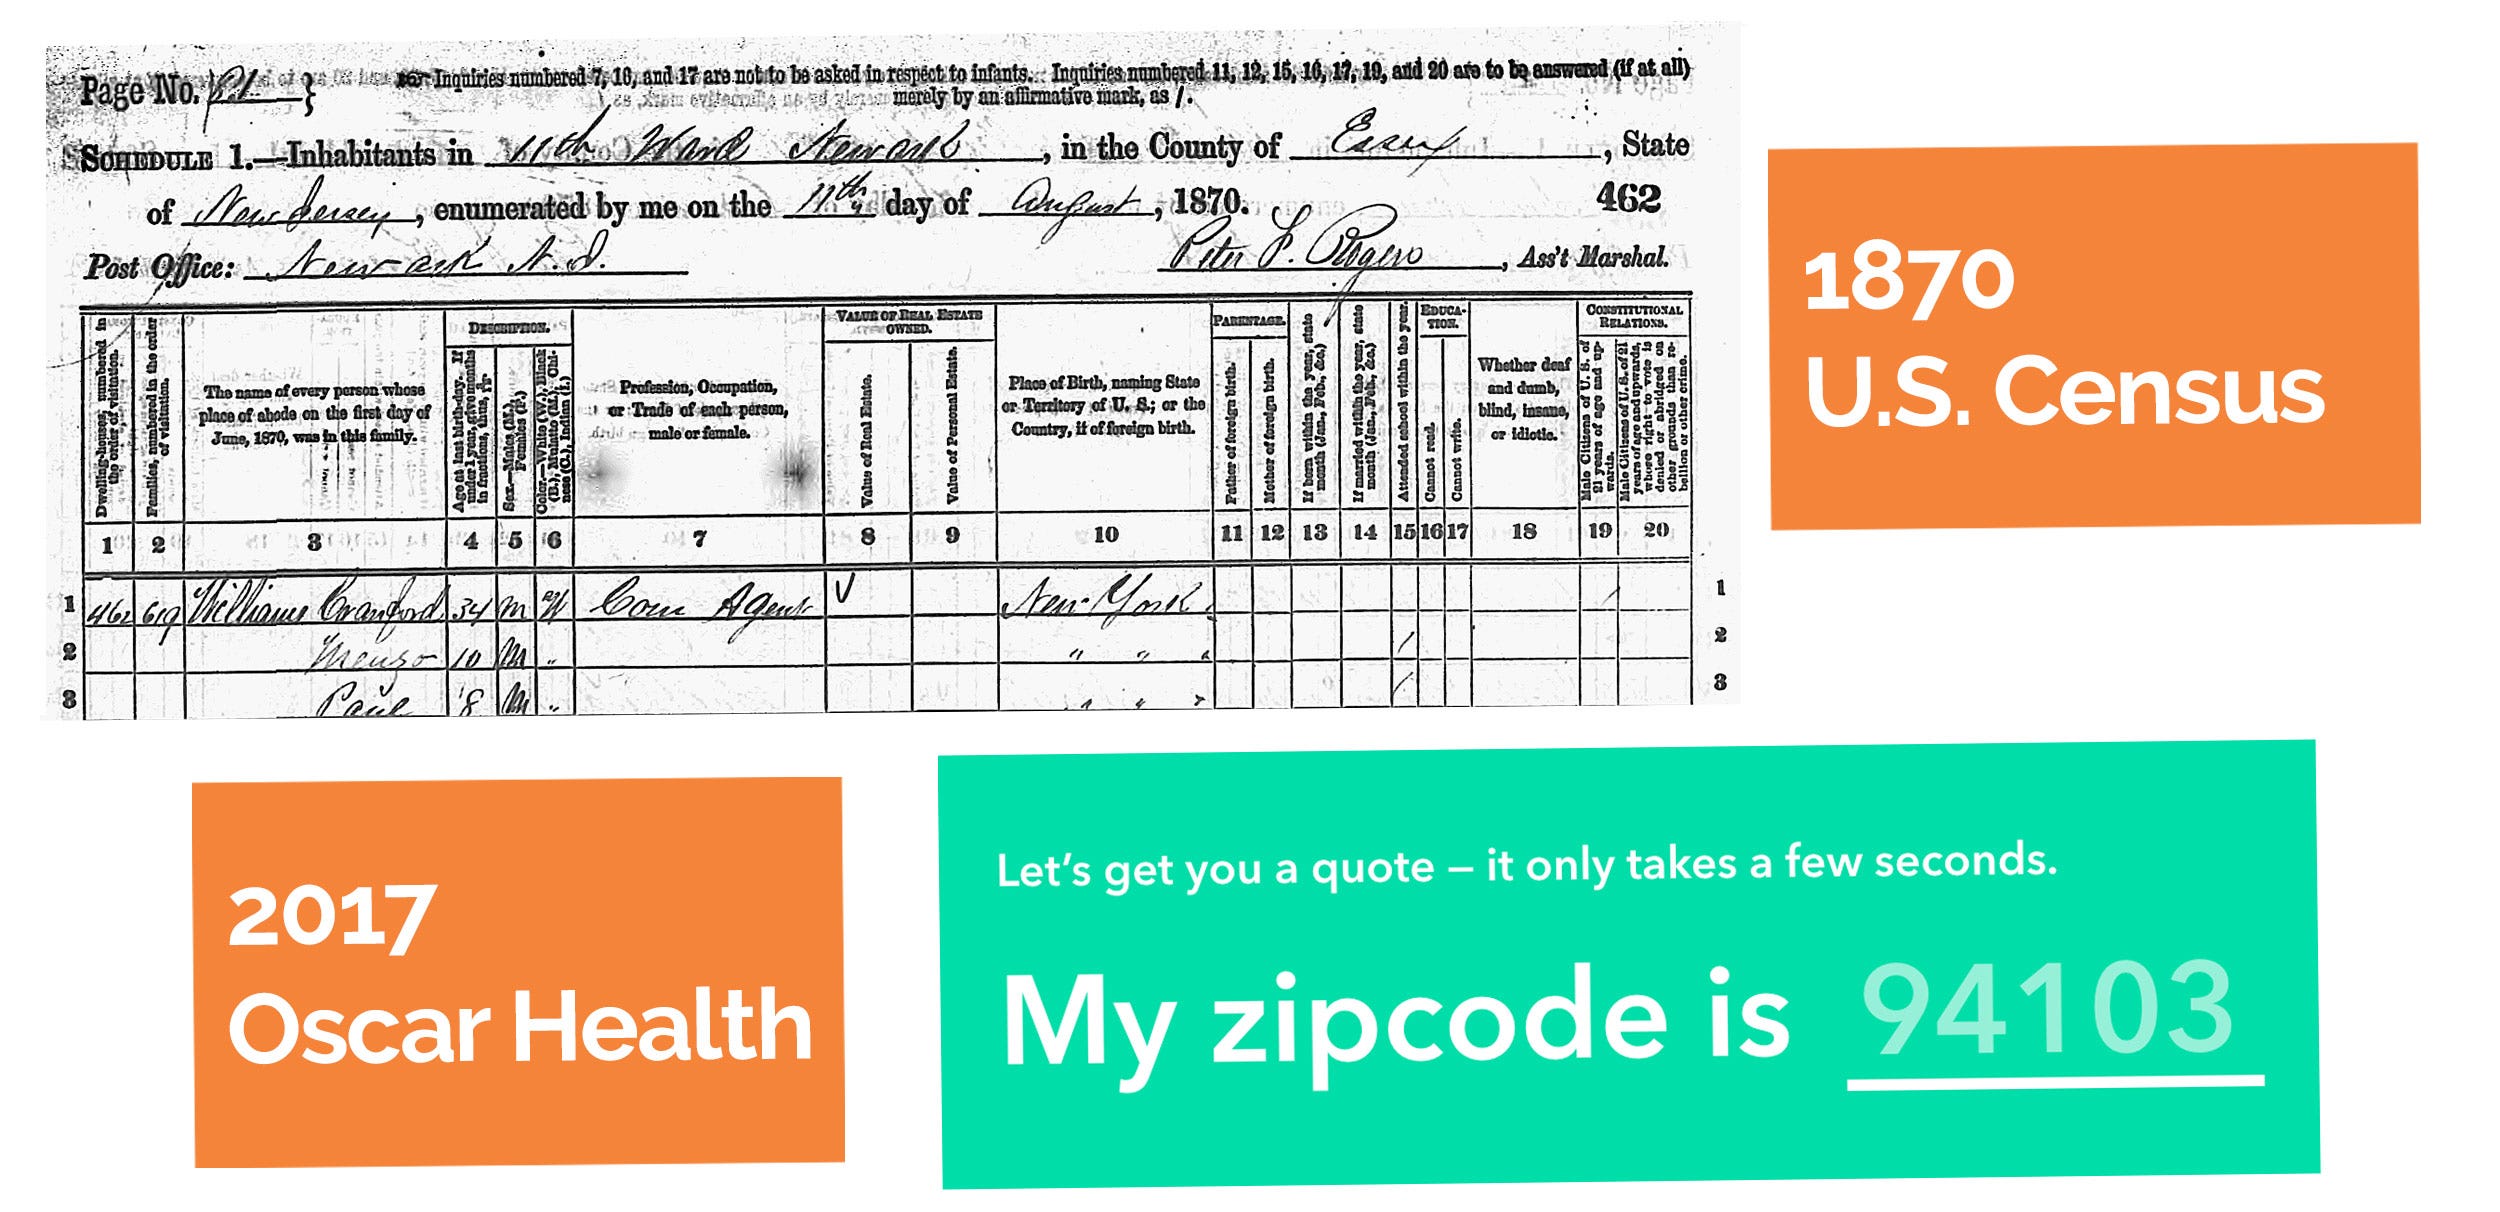 The 1870 U.S. Census uses a fundamentally similar form design to a modern startup in 2017, Oscar Health.